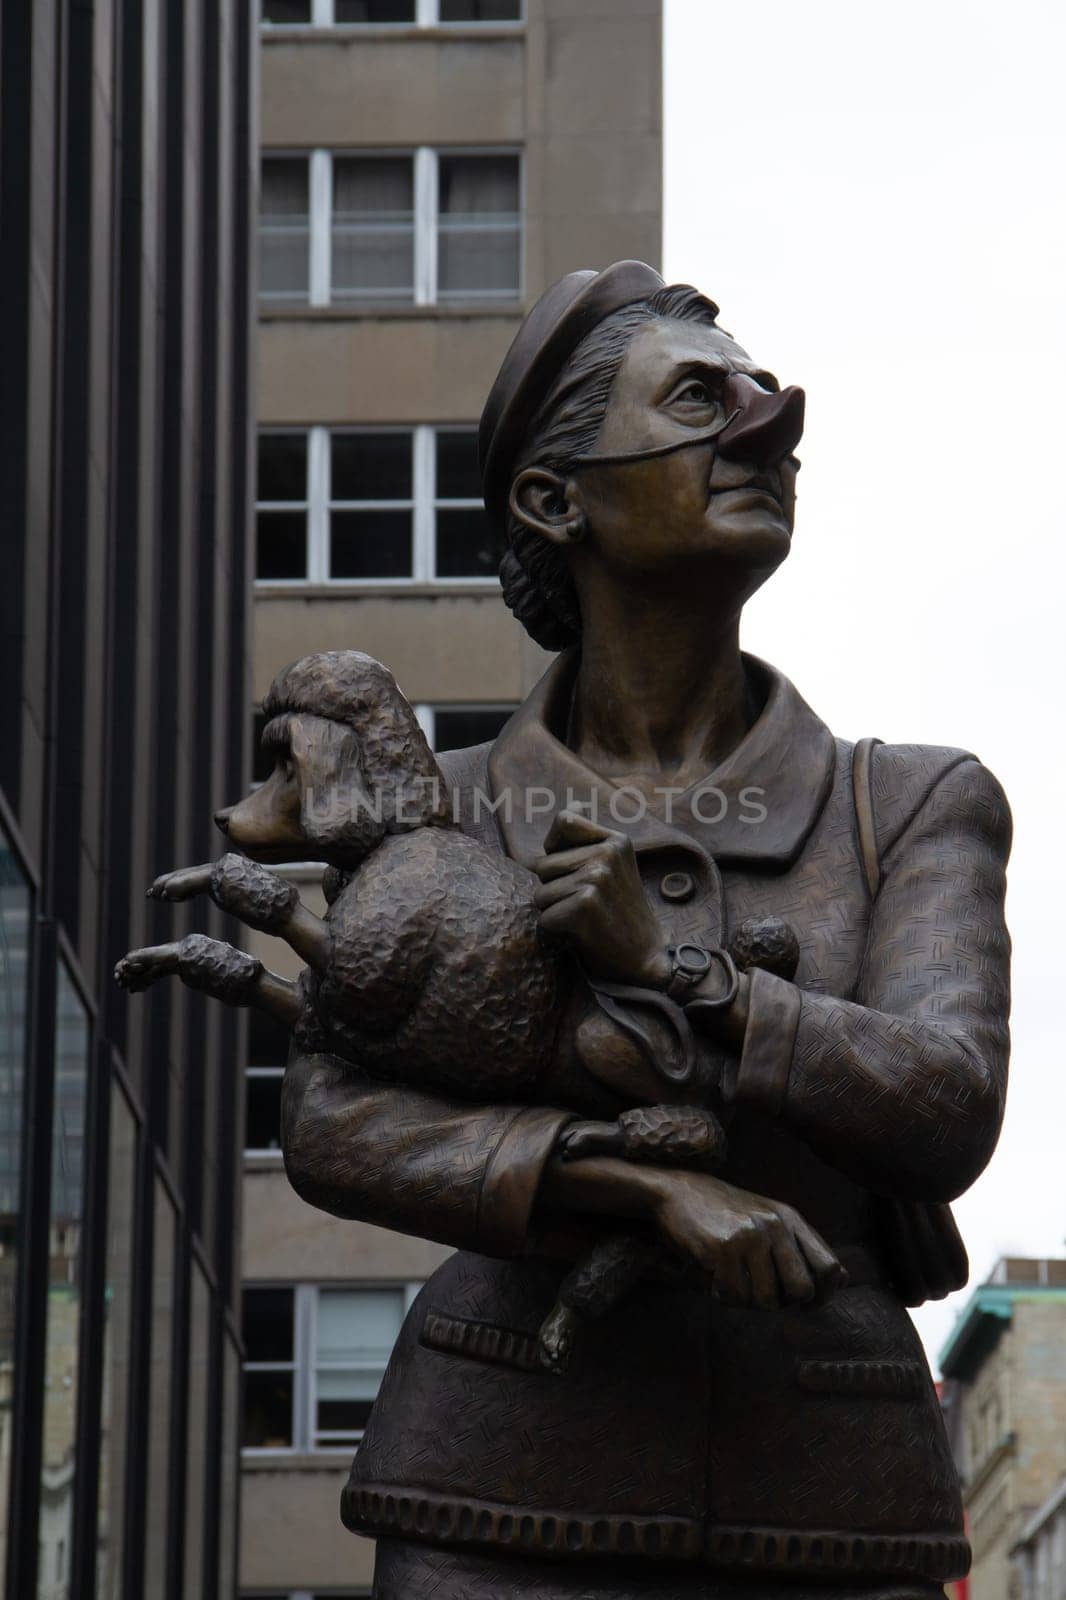 One of two bronze sculptures by Canadian artist Marc Andre J. Fortier, installed at 500 Place d'Armes in Montreal, Quebec, Canada. This sculpture is of a Frenchwoman represented as a small, elegant, snooty lady, wearing a Chanel-style suit, rubber-zippered high-heeled shoe covers and an imitation beret, firmly holds against her chest a French Poodle and stares with discontent at the head office of the Bank of Montreal, a symbol of the English power.